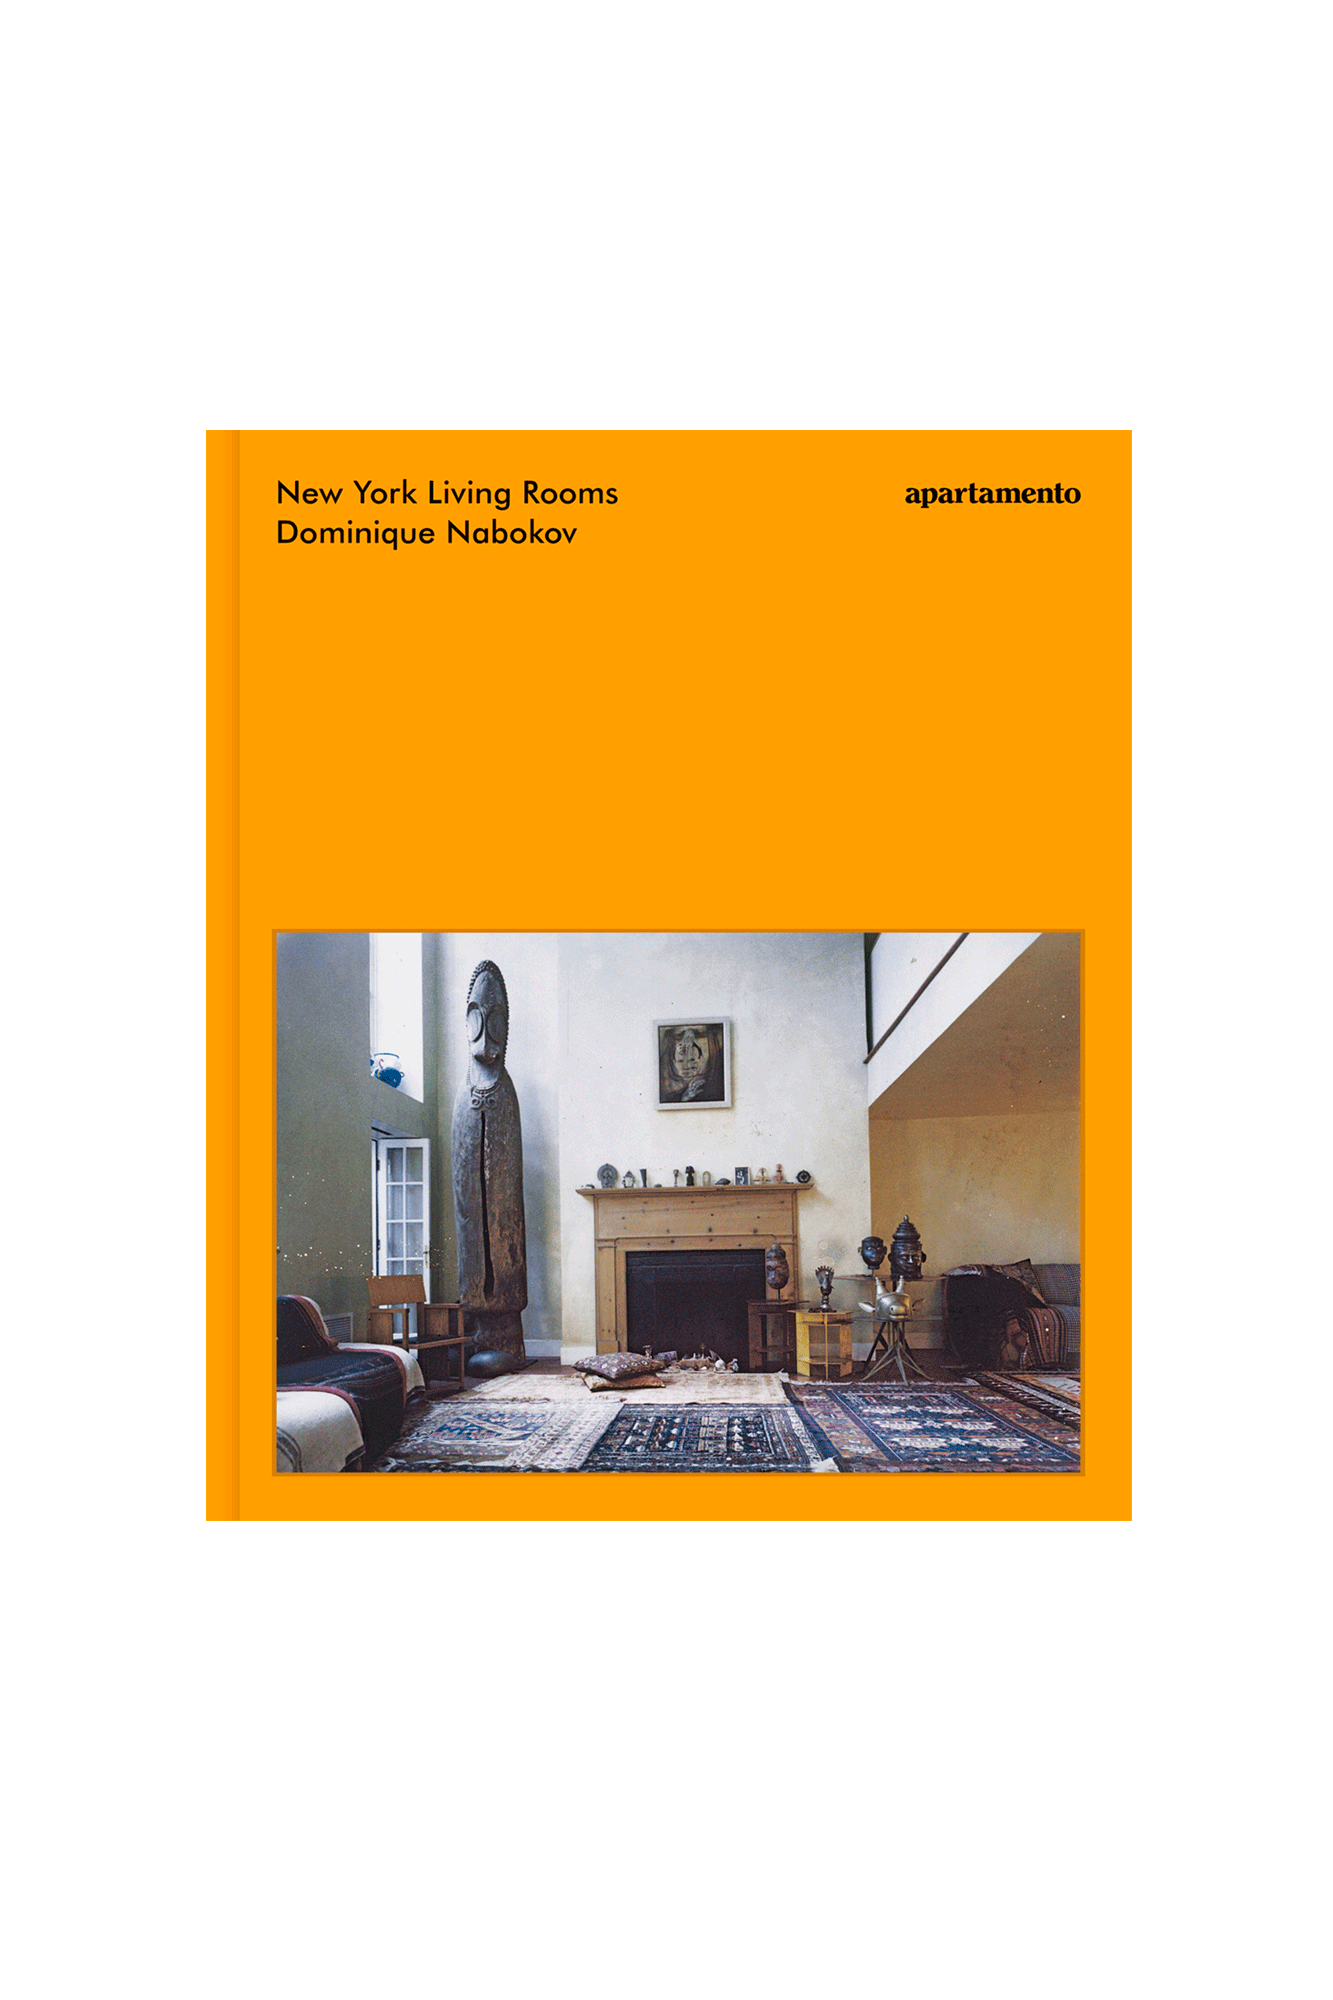 New York Living Rooms by D. Nabokov